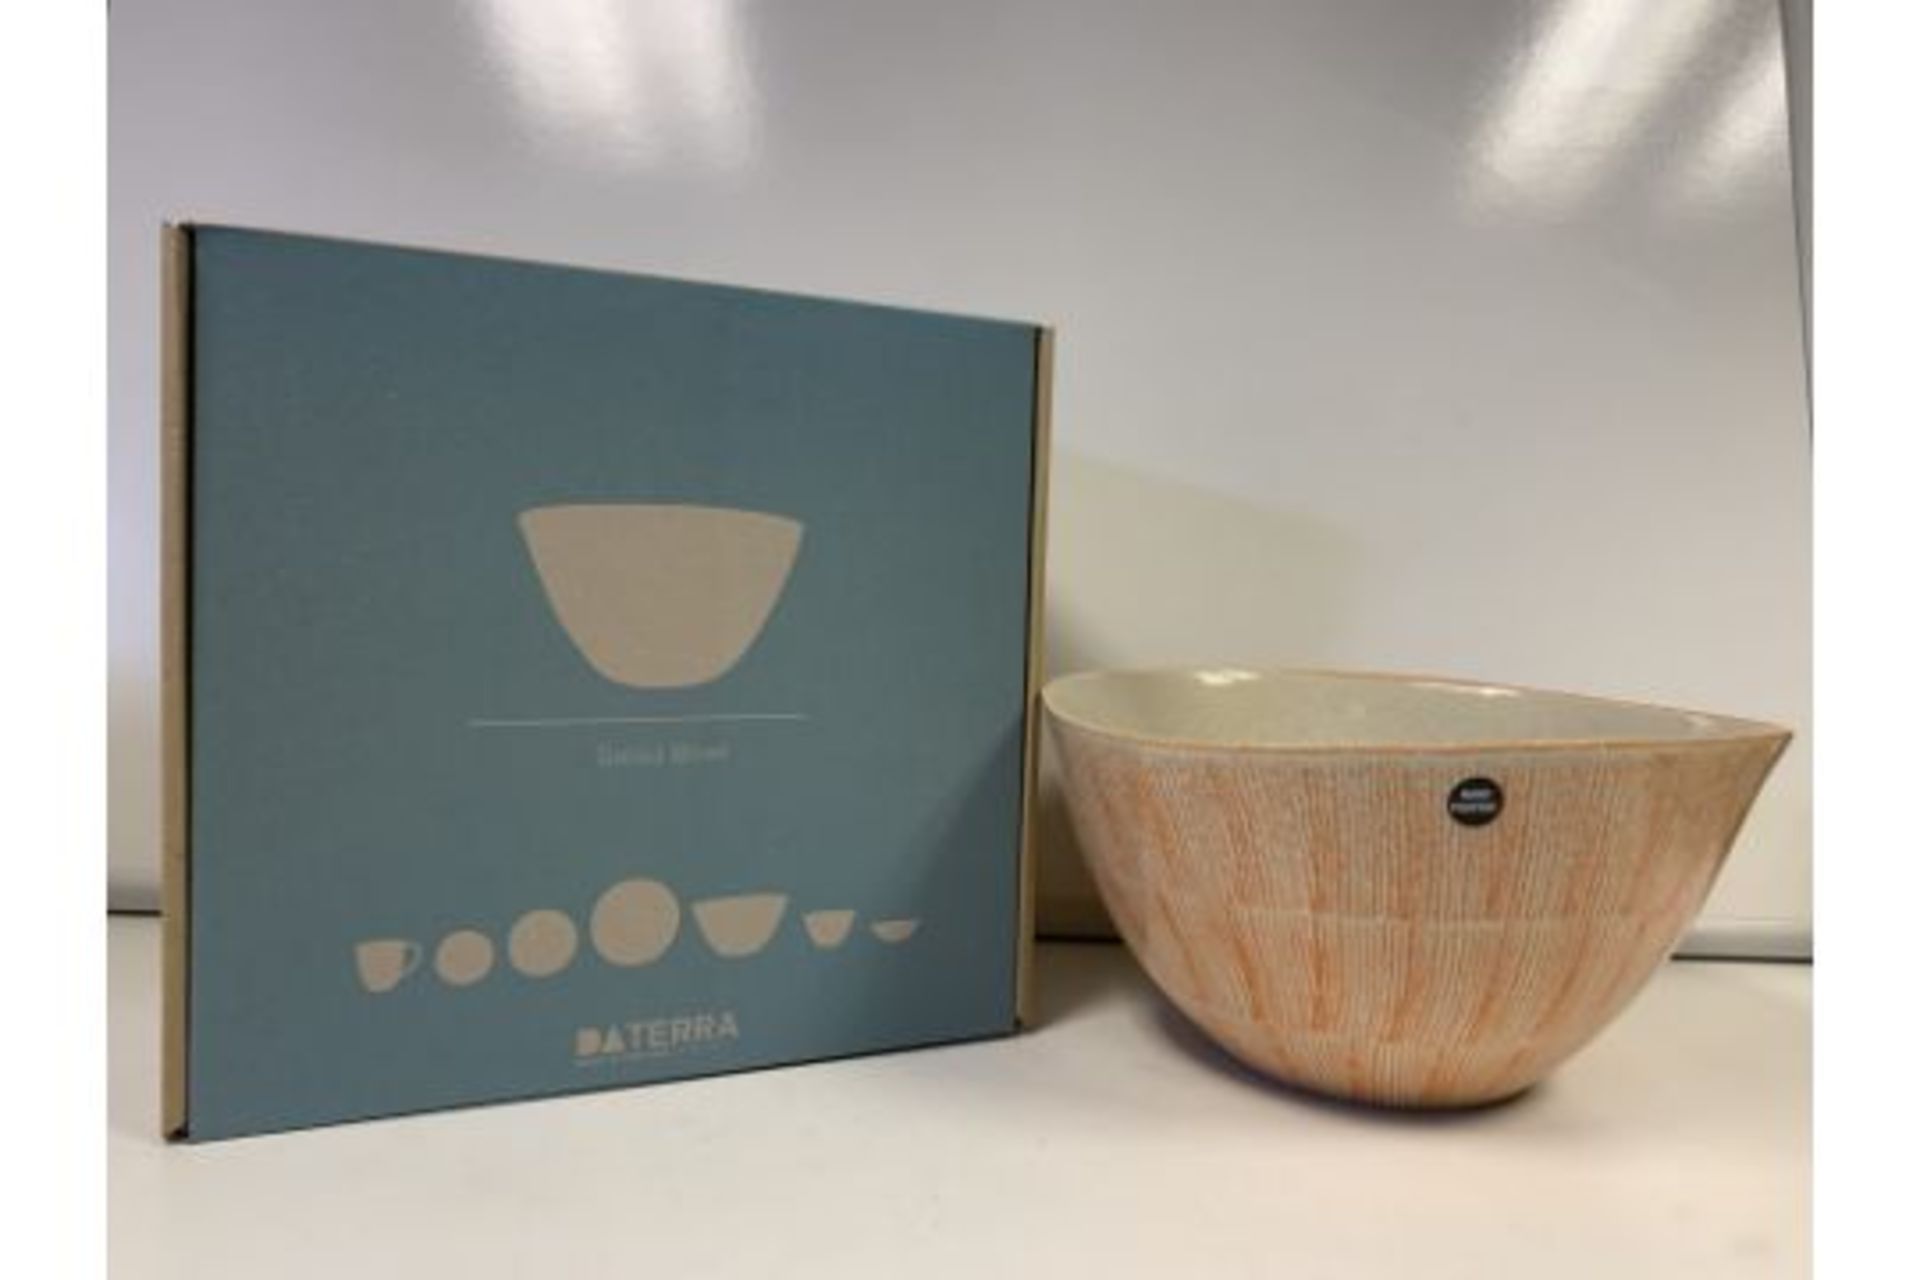 6 X BRAND NEW INDIVIDUALLY RETAIL BOXED DA TERRA BUNOL SALAD BOWLS RRP £65 EACH (HAND CRAFTED,